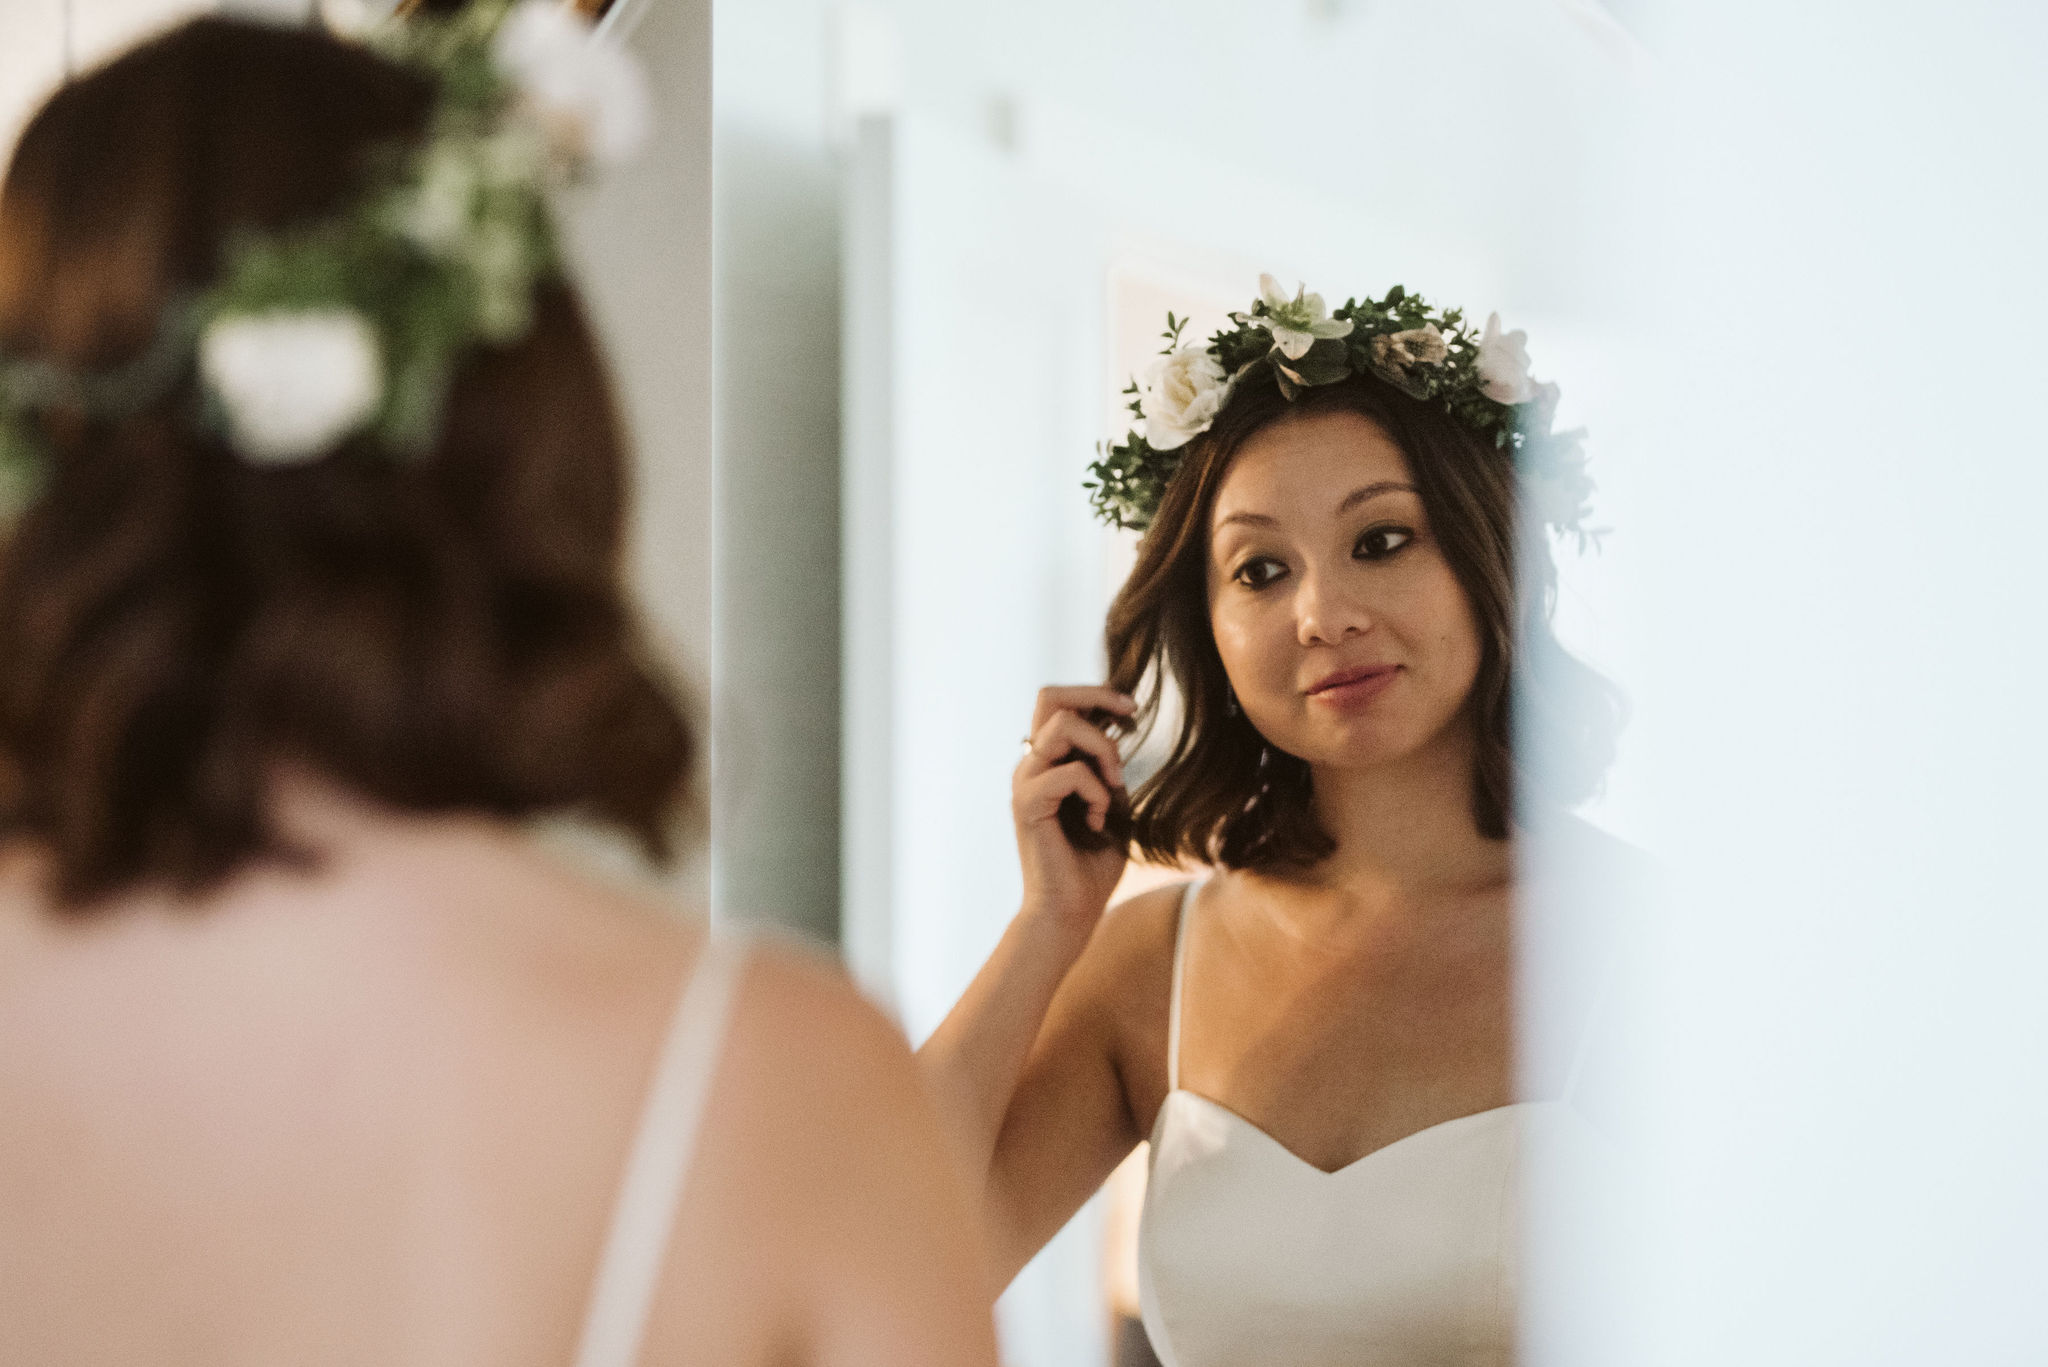  Washington DC, Baltimore Wedding Photographer, Alexandria, Old Town, Jewel Tone, Romantic, Modern, The Alexandrian Autograph Collection Hotel, Bride fixing hair in the mirror, Flower crown 